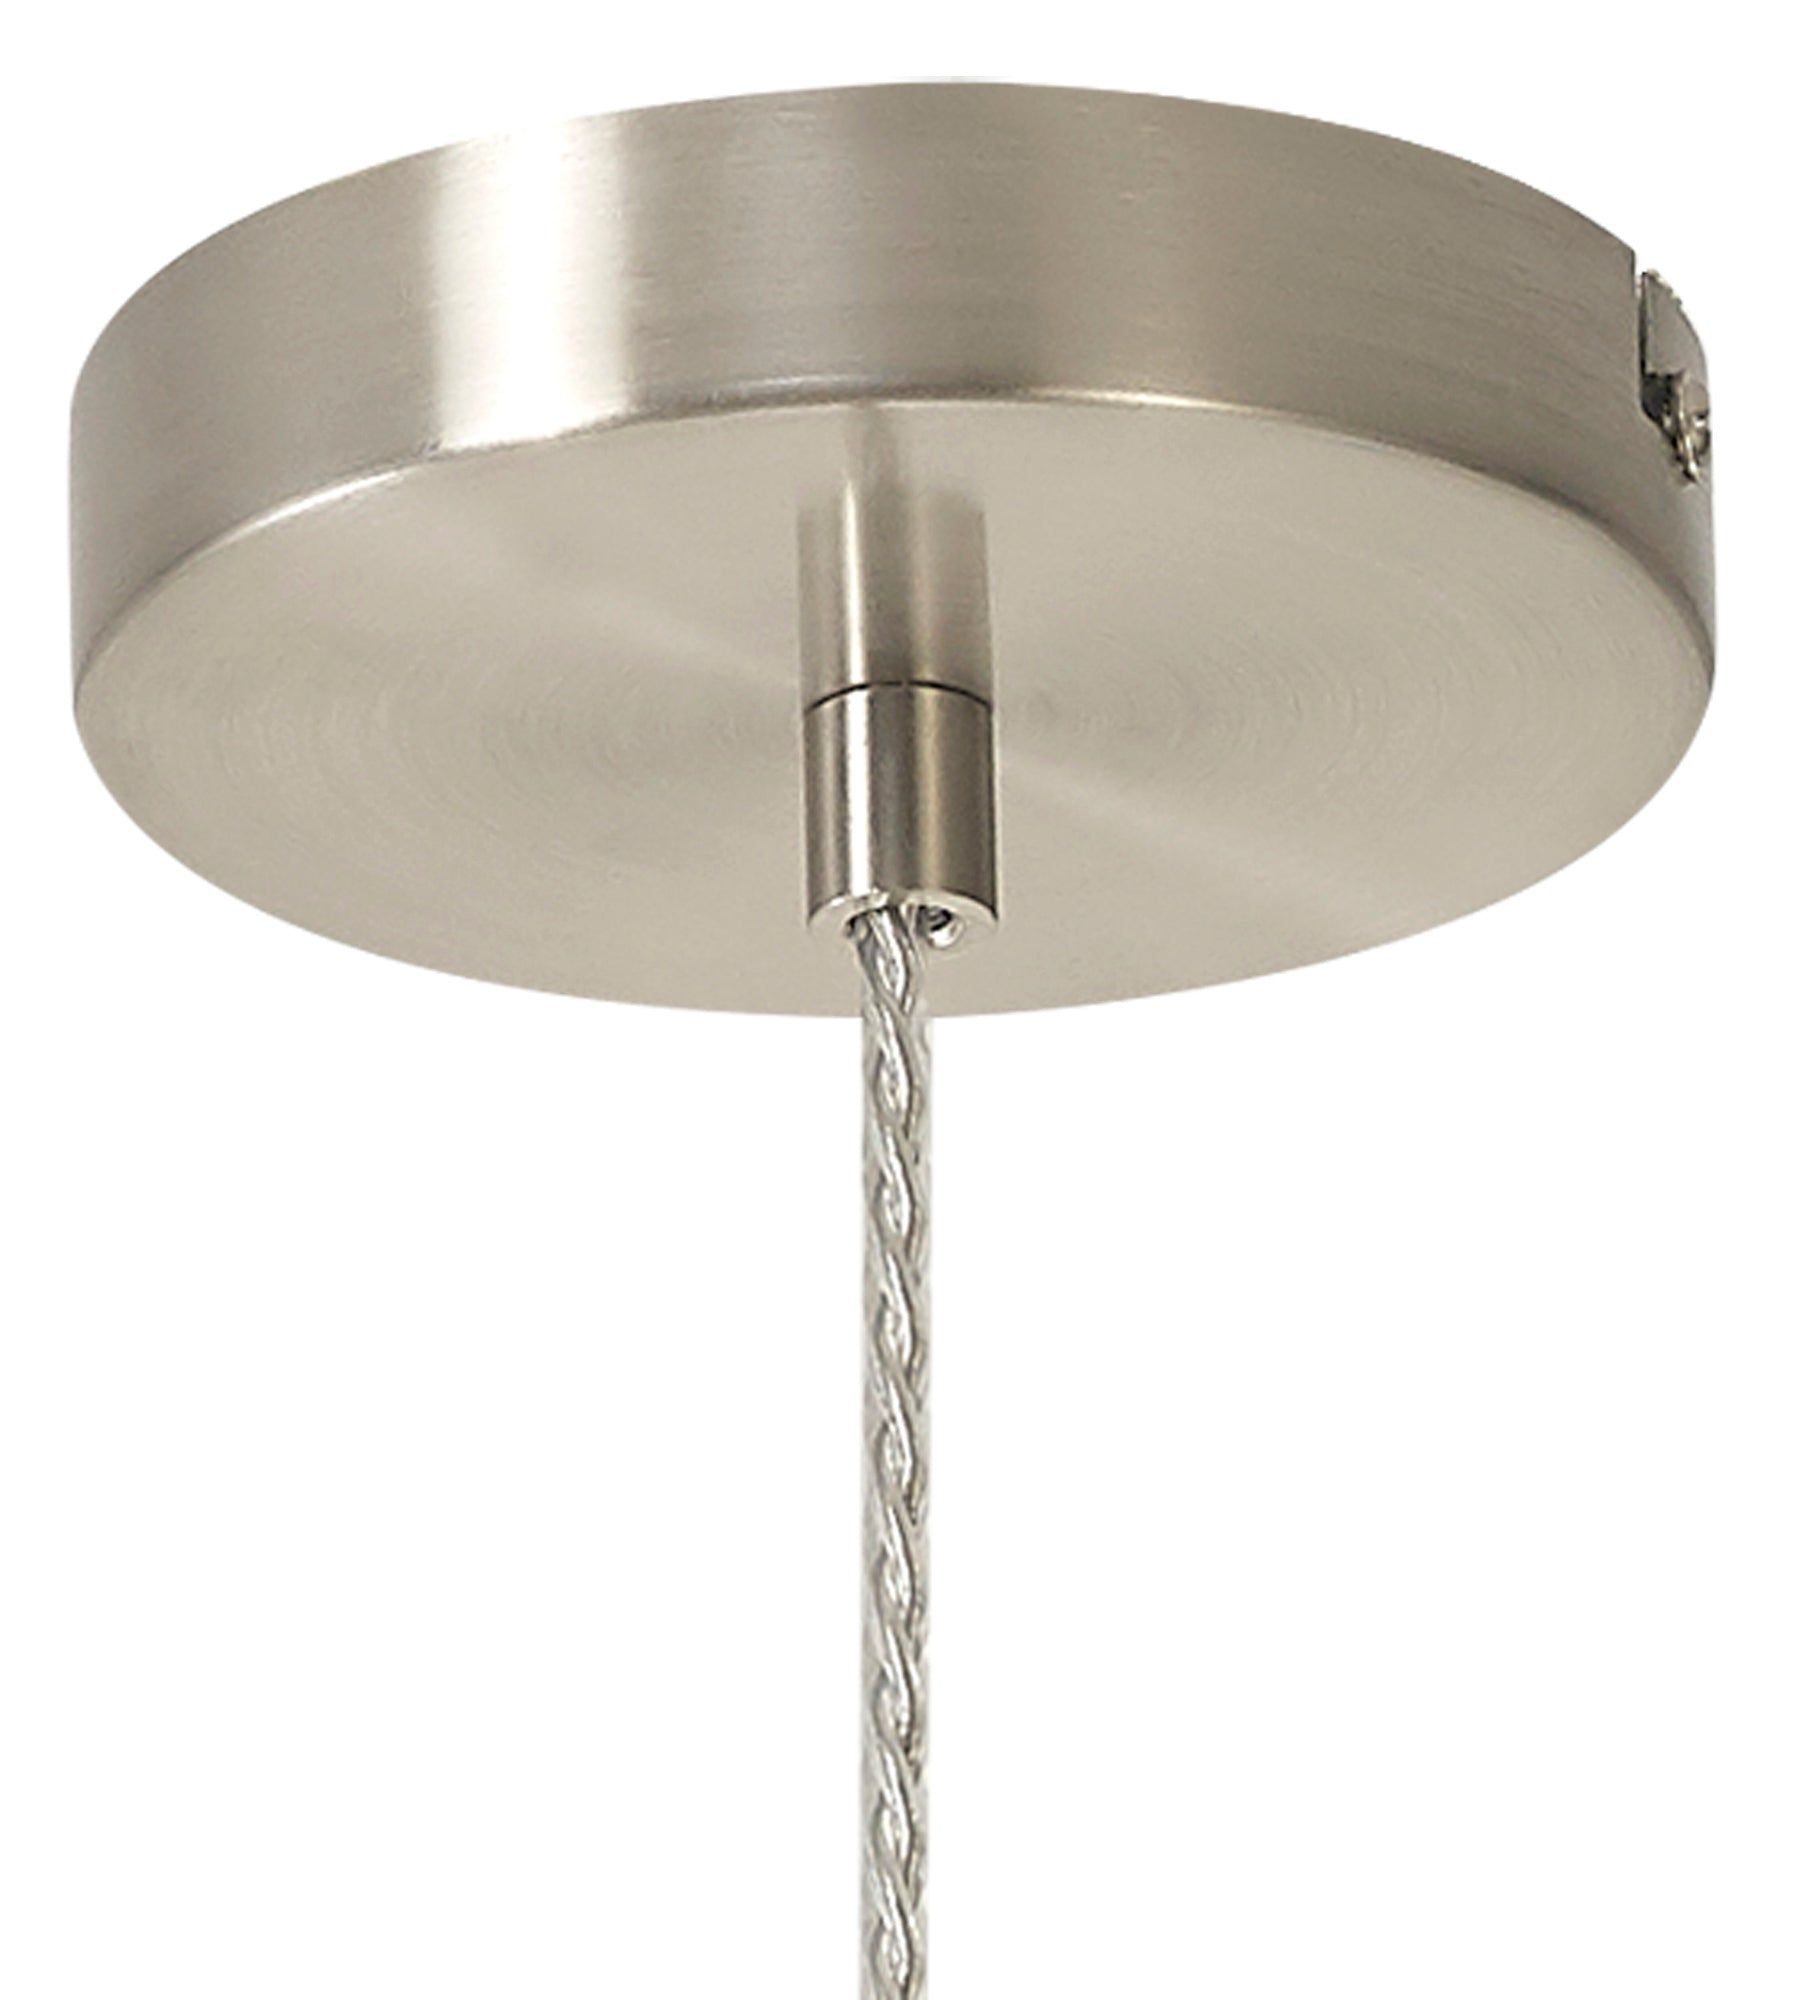 Tuomeb Wide Pendant, Narrow Pendant,Ancient Brass/Clear Glass/Satin Nickel/Opal Glass & Clear Twisted Cable